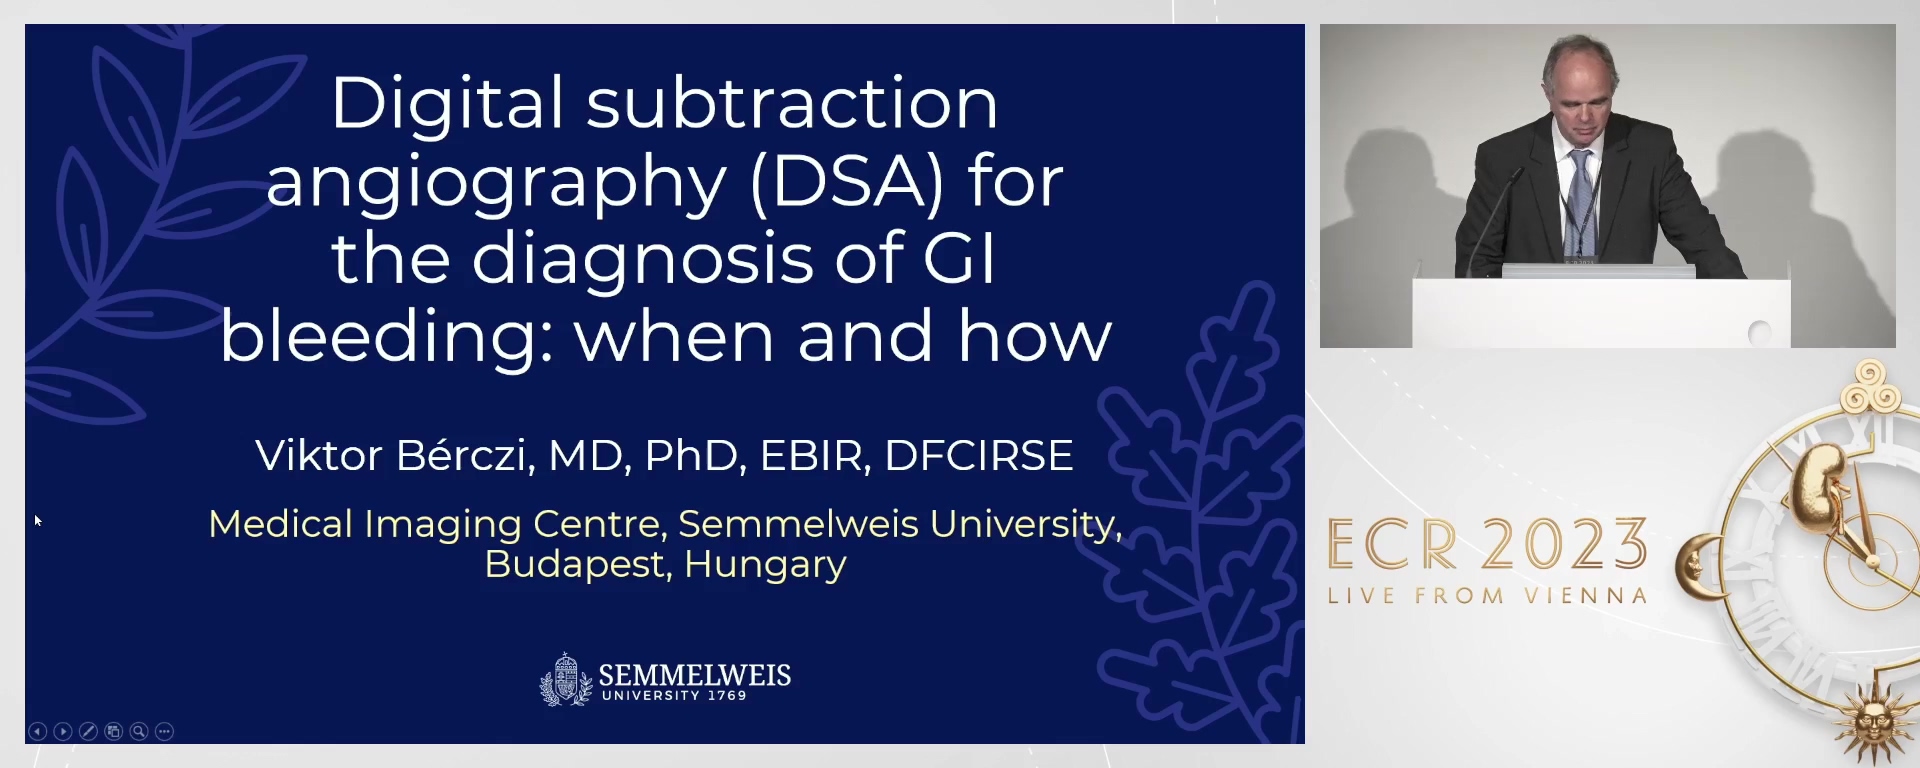 Digital subtraction angiography (DSA) for the diagnosis of GI bleeding: when and how